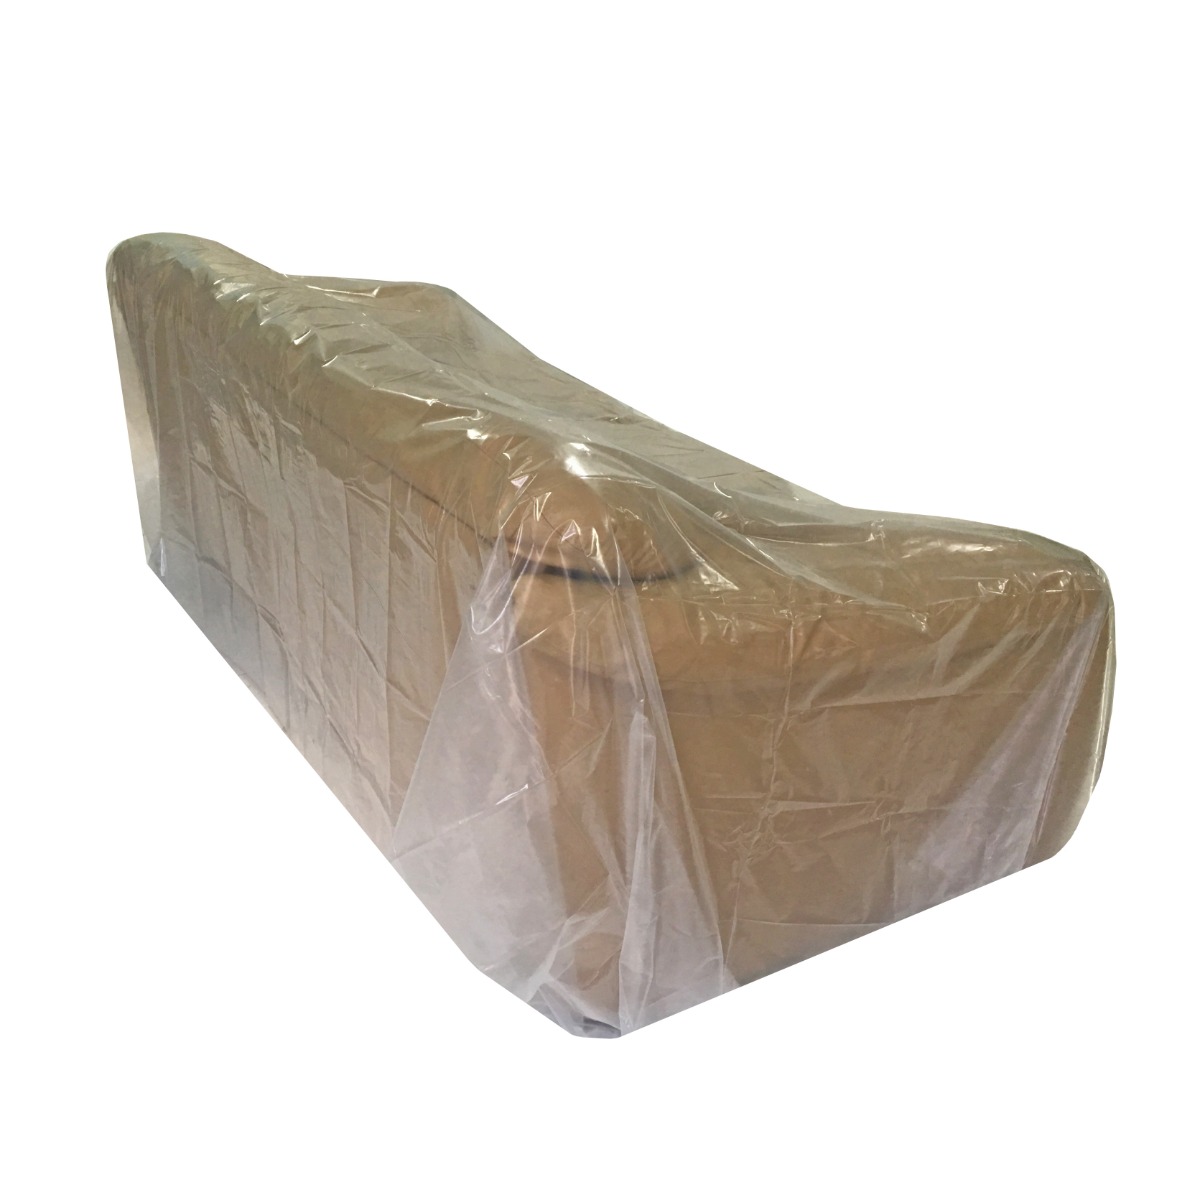 UBMOVE 13 Sofa Covers 152&quot; x 45&quot; Poly Bags for Protective Moving Storage